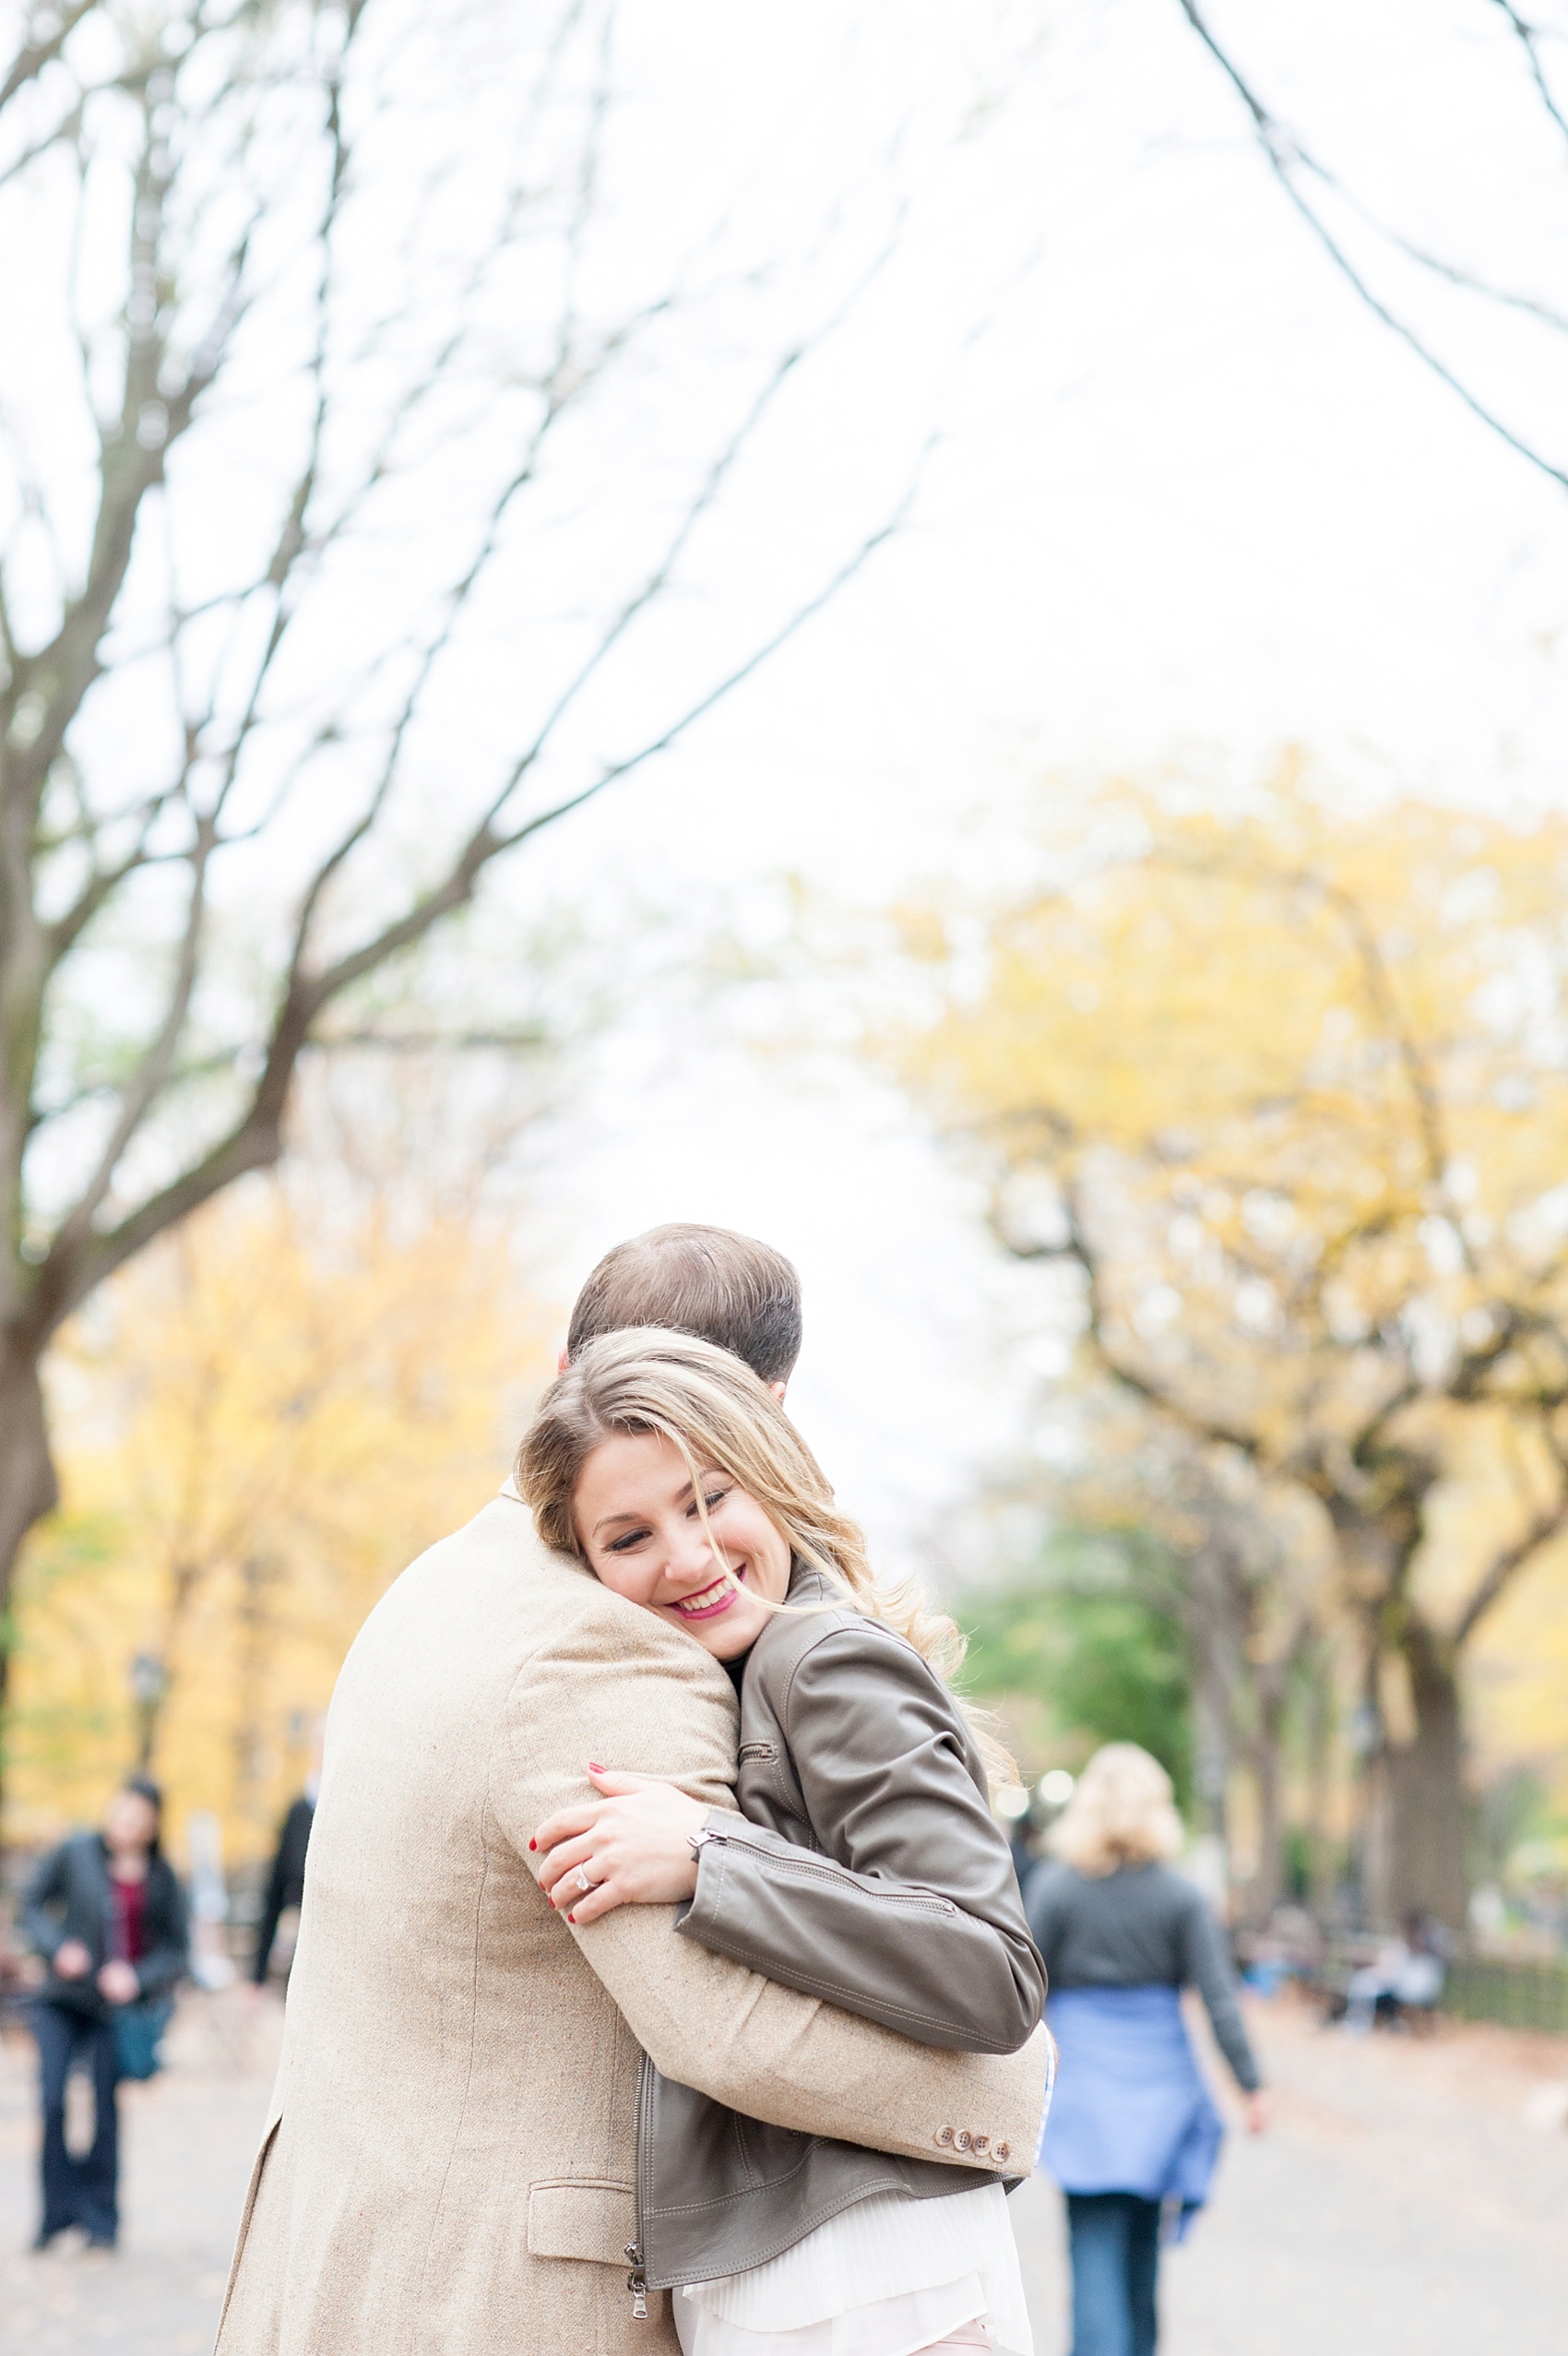 Central Park fall engagement photos in NYC by New York City wedding photographer, Mikkel Paige Photography. Photos by the film famous Literary Walk.